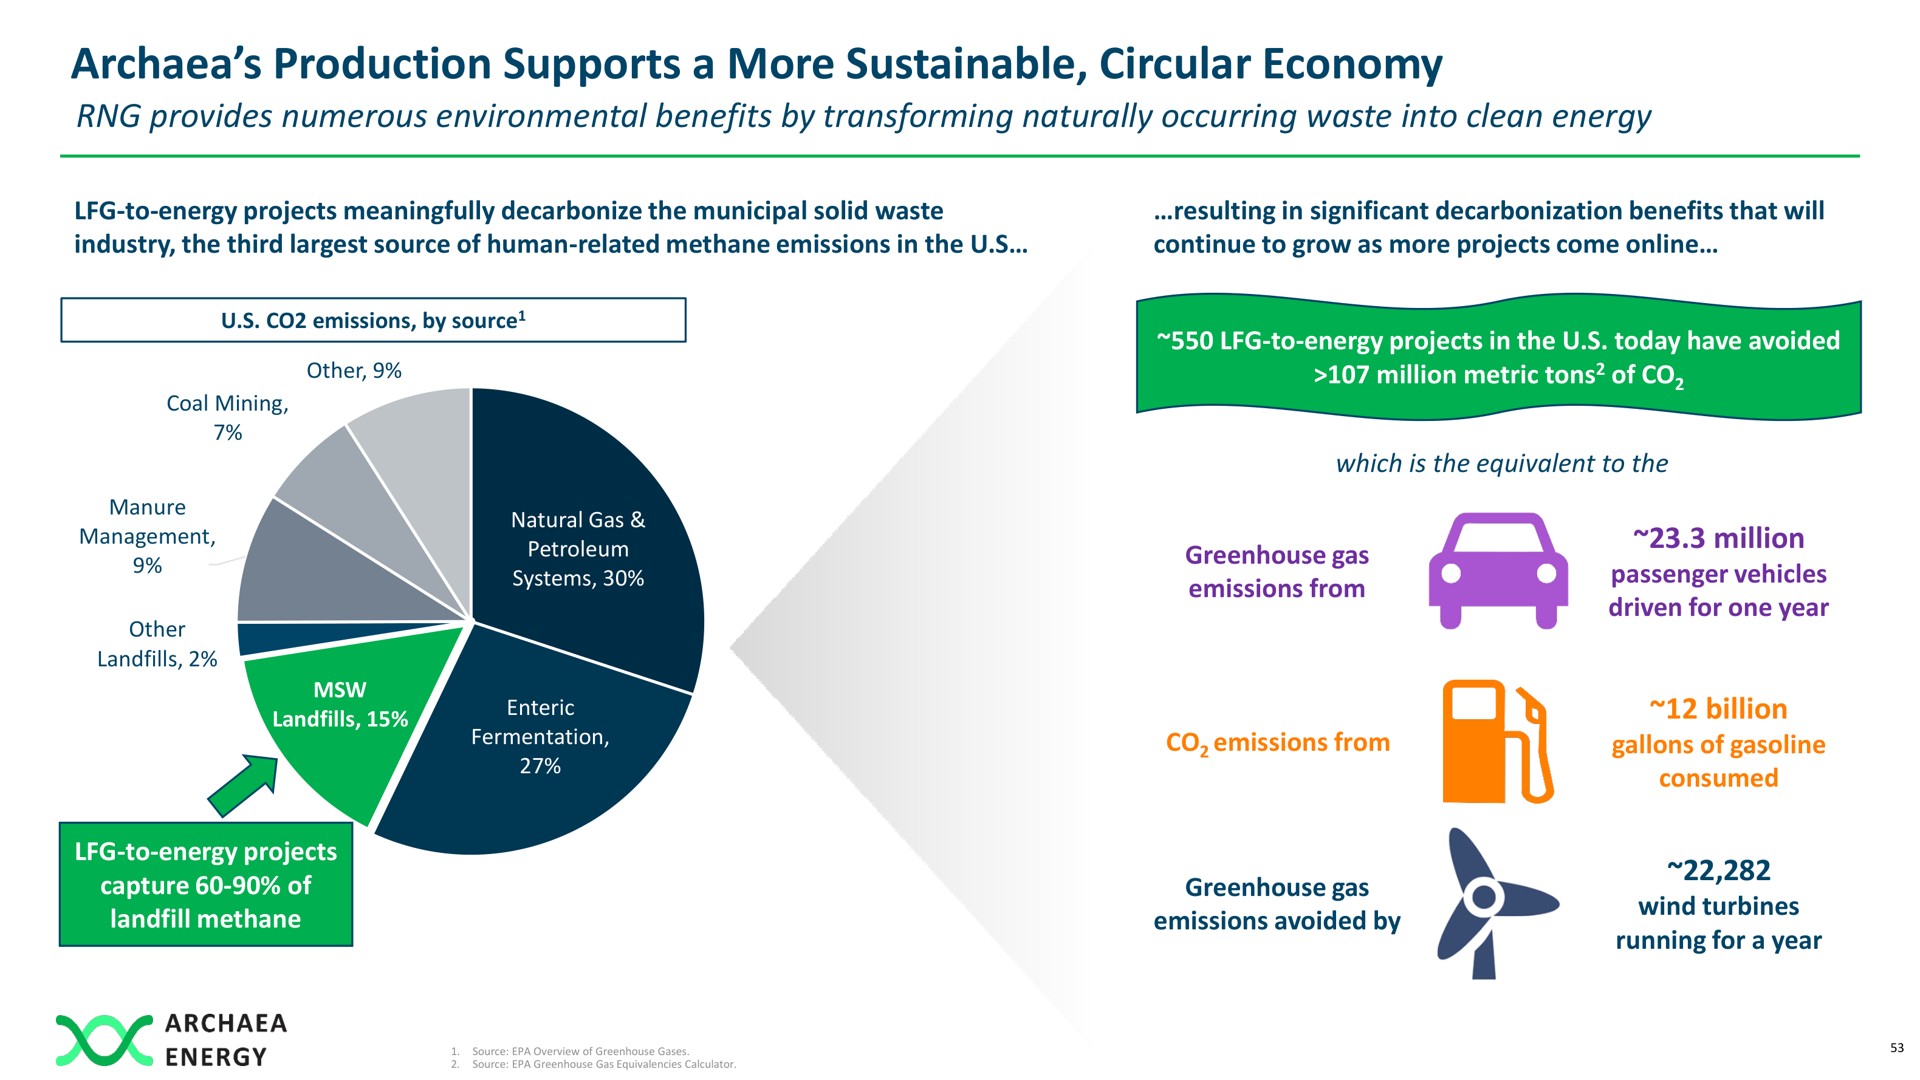 production supports a more sustainable circular economy | Archaea Energy